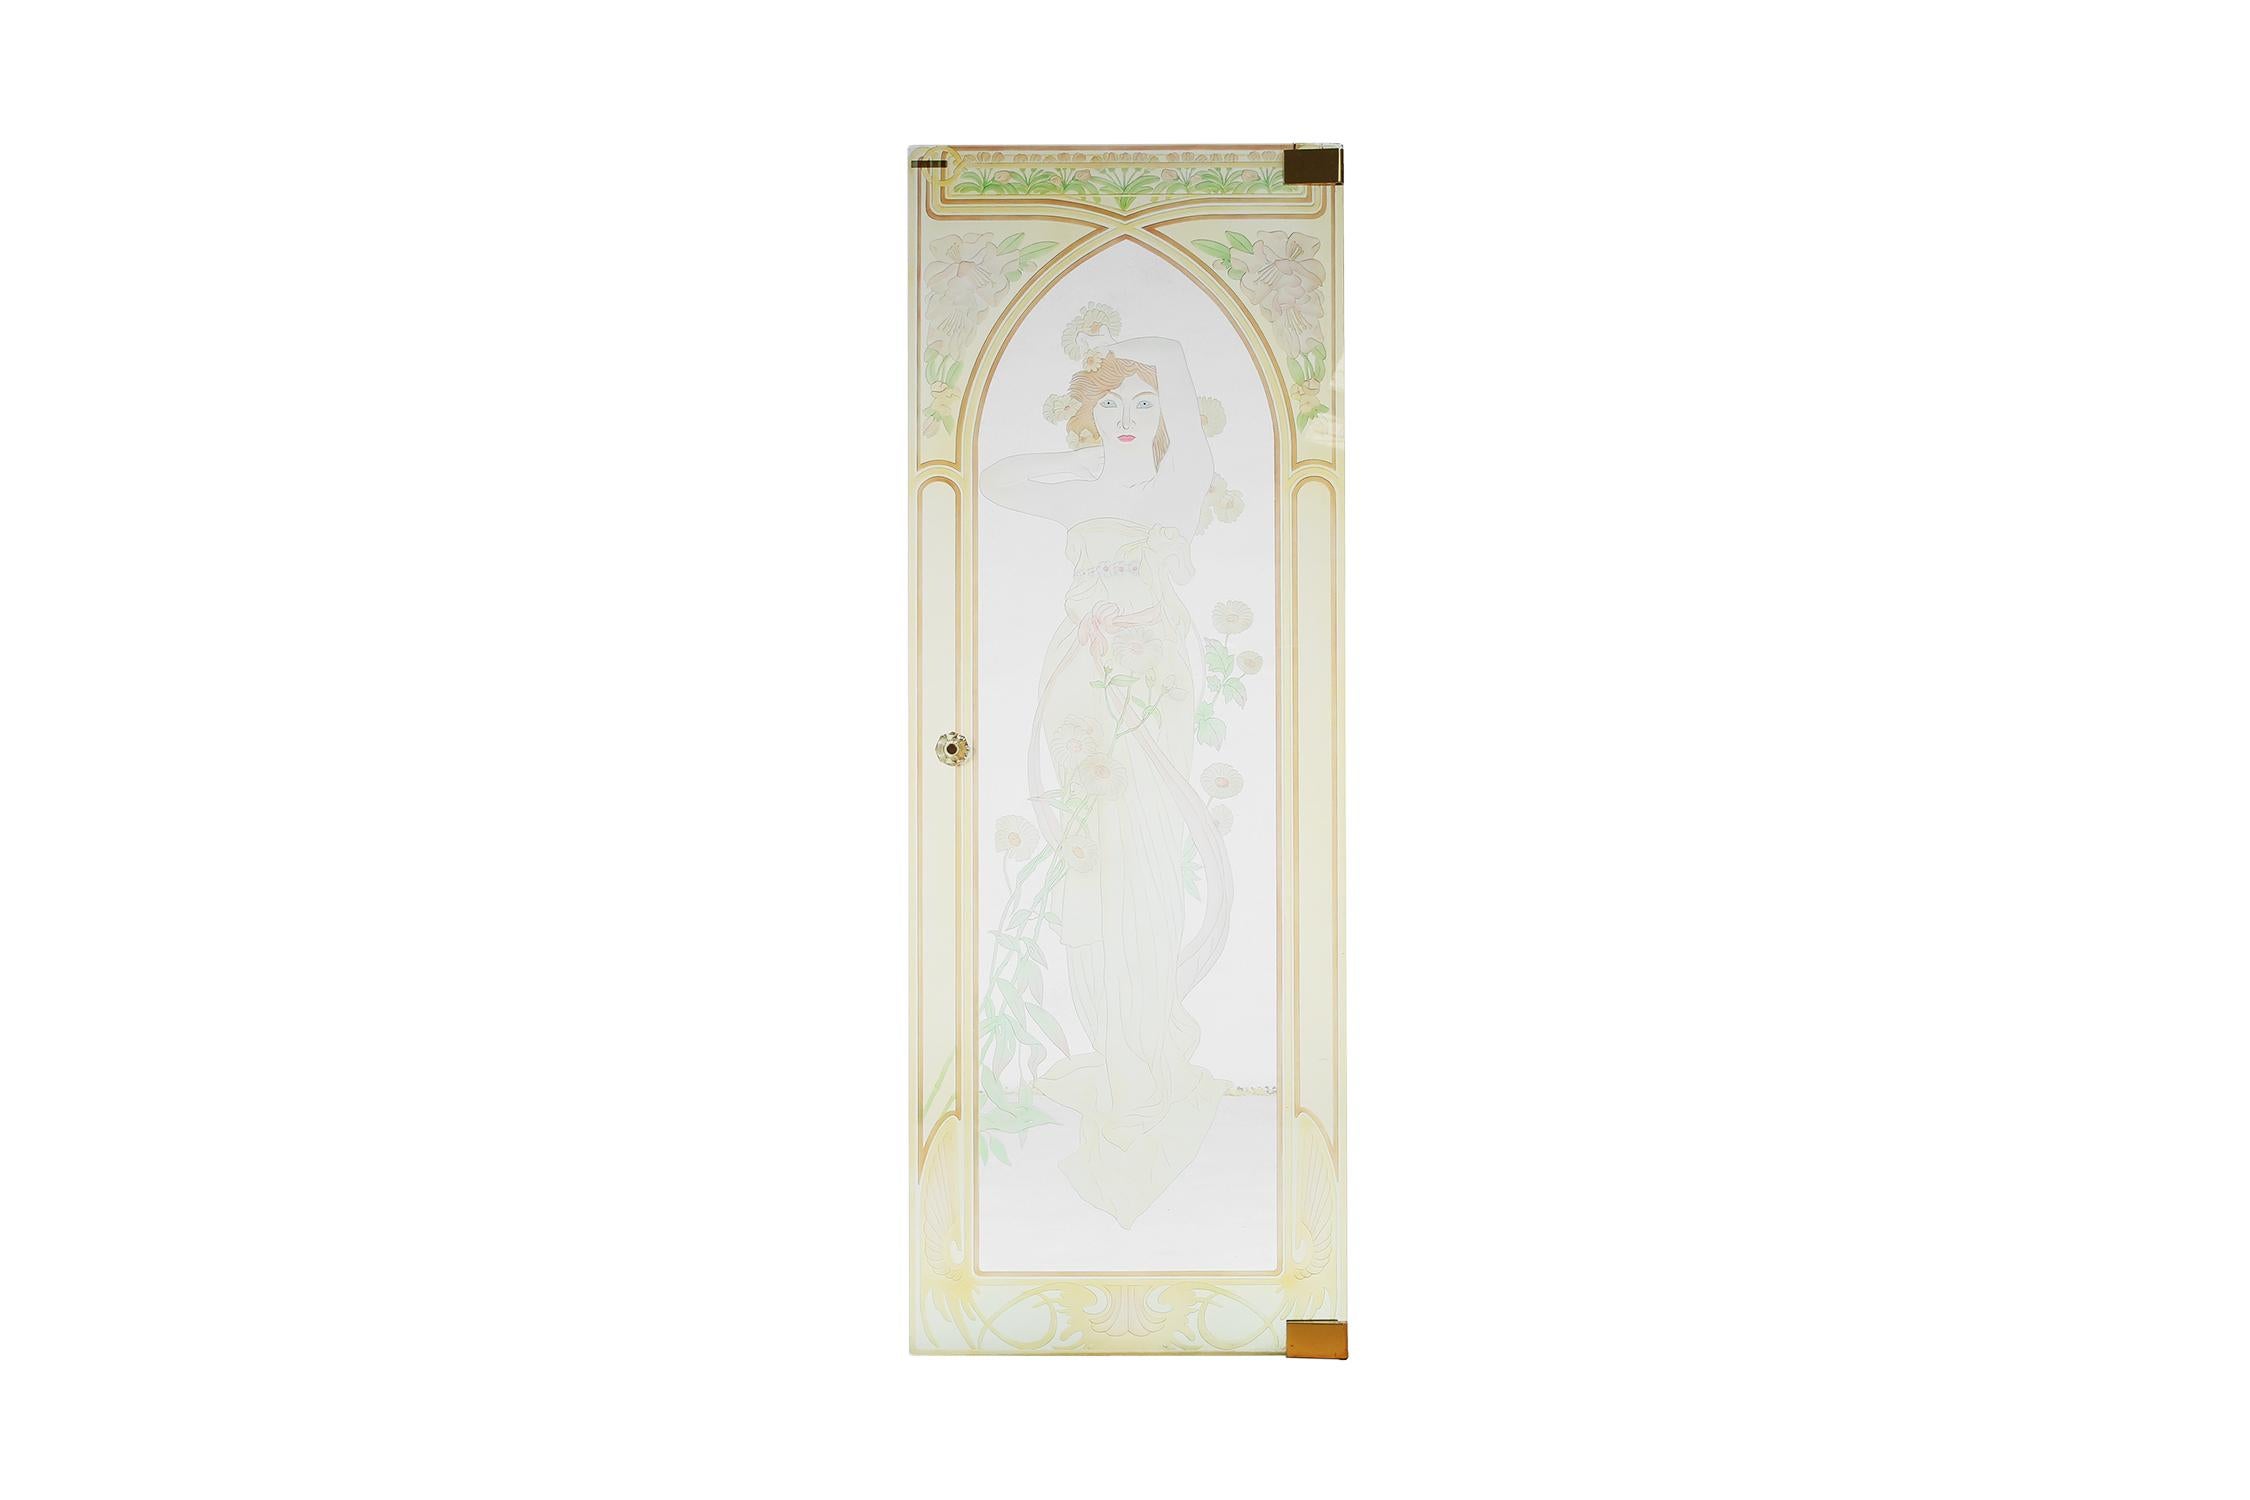 A set of two beautiful glass doors with an etched Art Nouveau scene. These doors are unique works of art and add a touch of elegance to any space. The etched scene shows an elegant lady surrounded by the characteristic flowing lines and natural